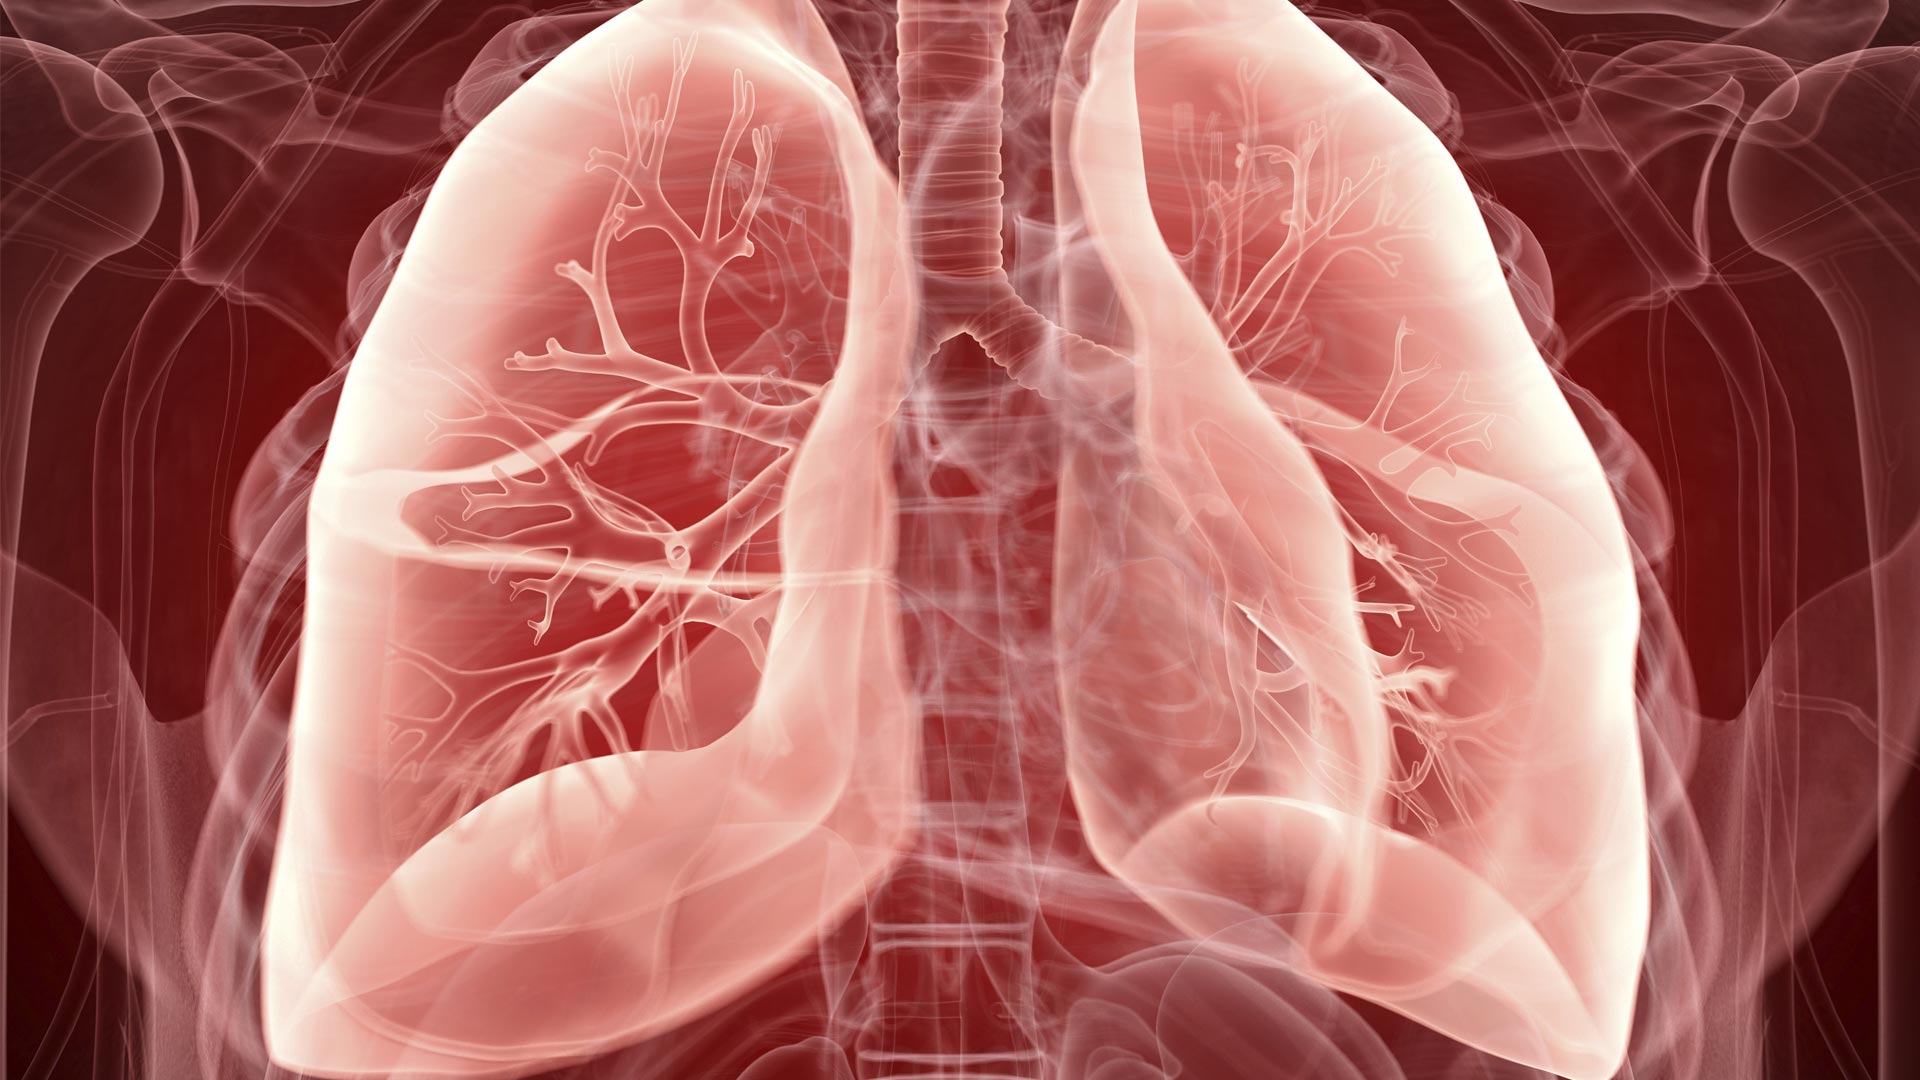 Using Exhaled RNA Molecules to Diagnose Airway Disease